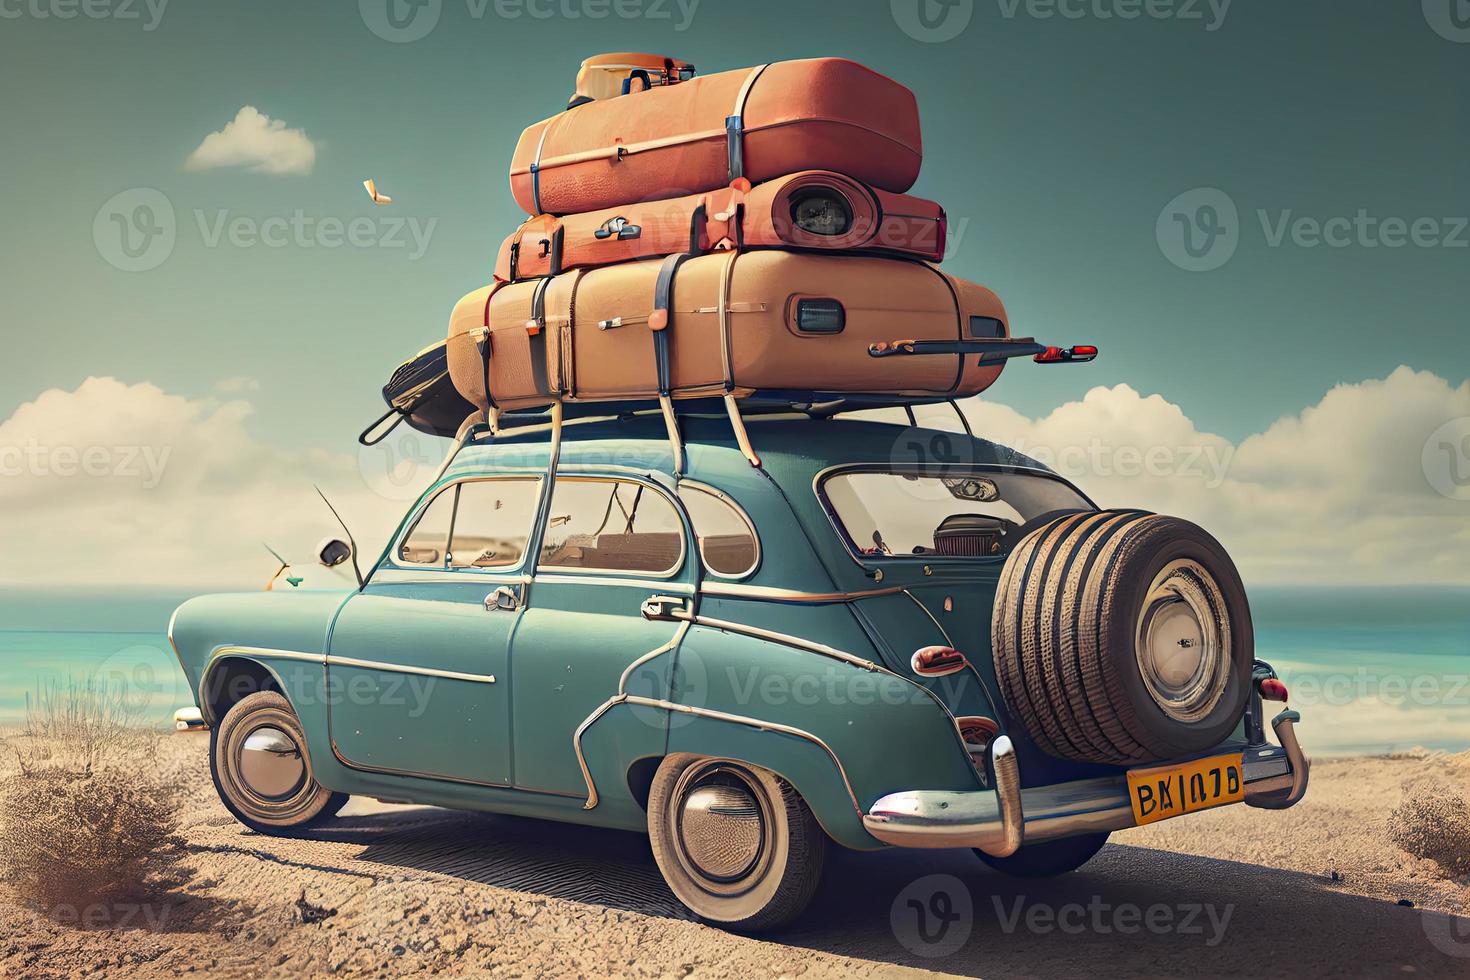 Small retro car with baggage, luggage and beach equipment on the roof, fully packed, ready for summer vacation, concept photo